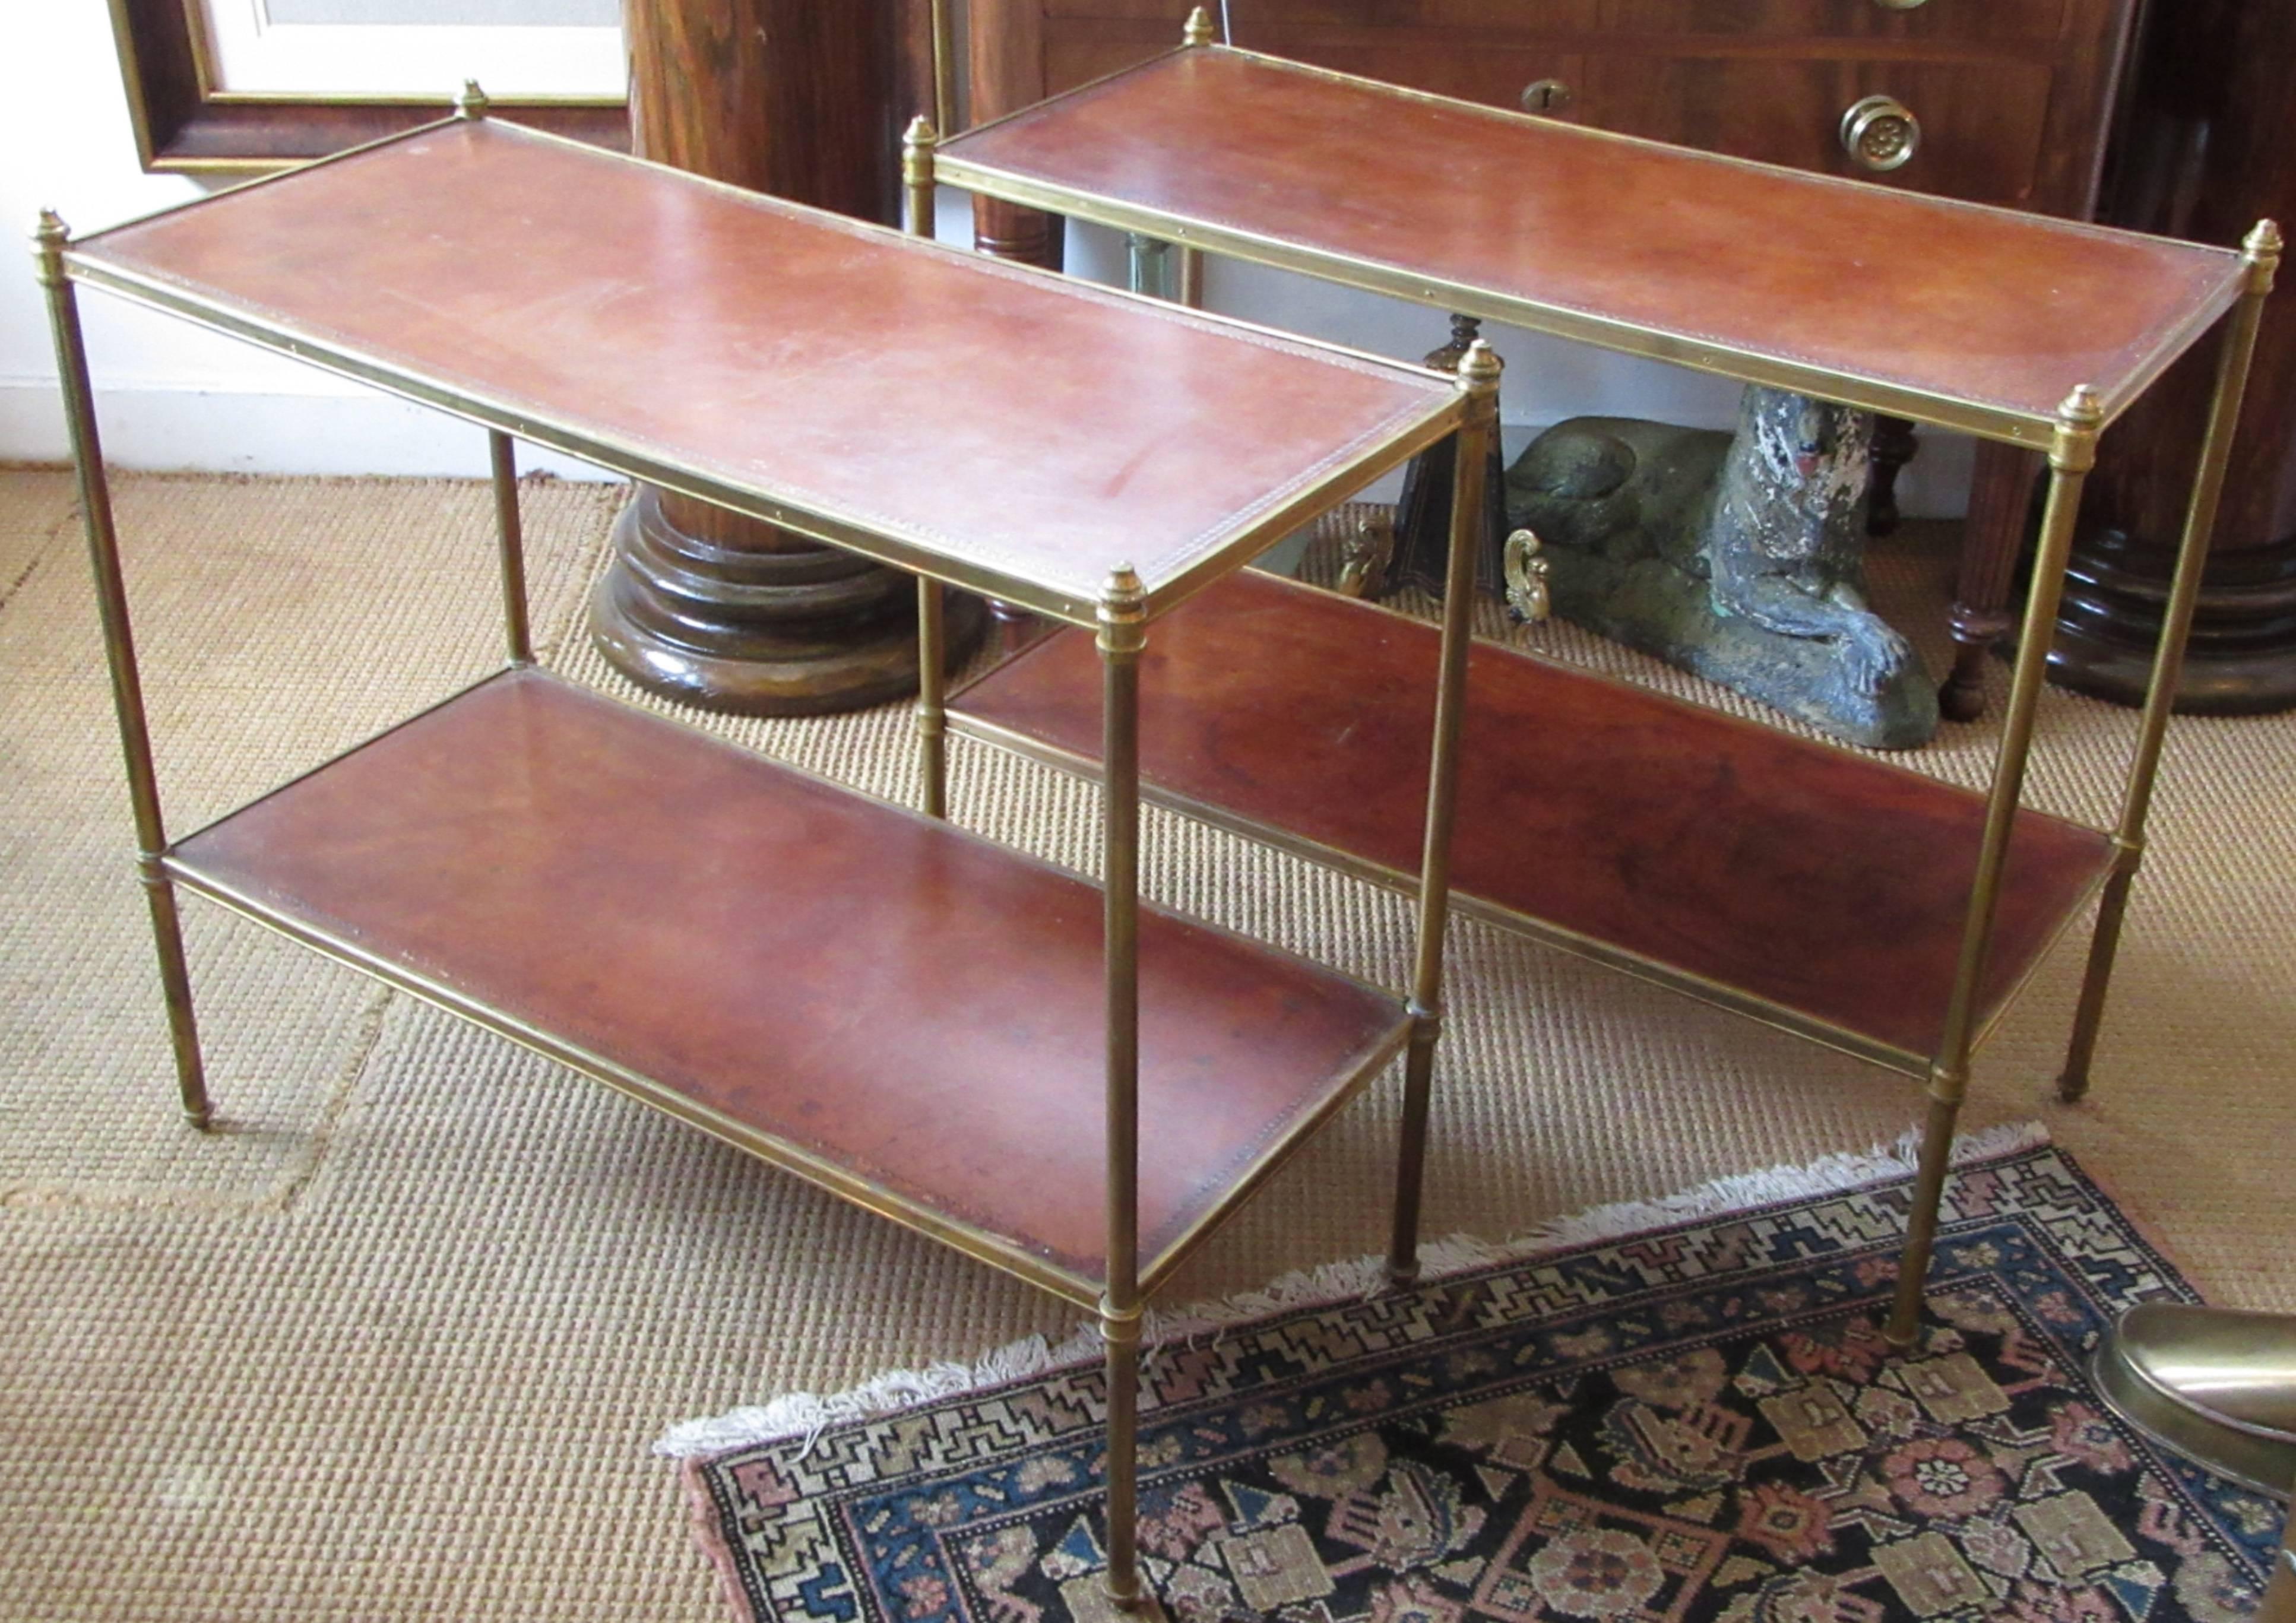 A pair of rectangular brass end tables with brown embossed leather shelves.